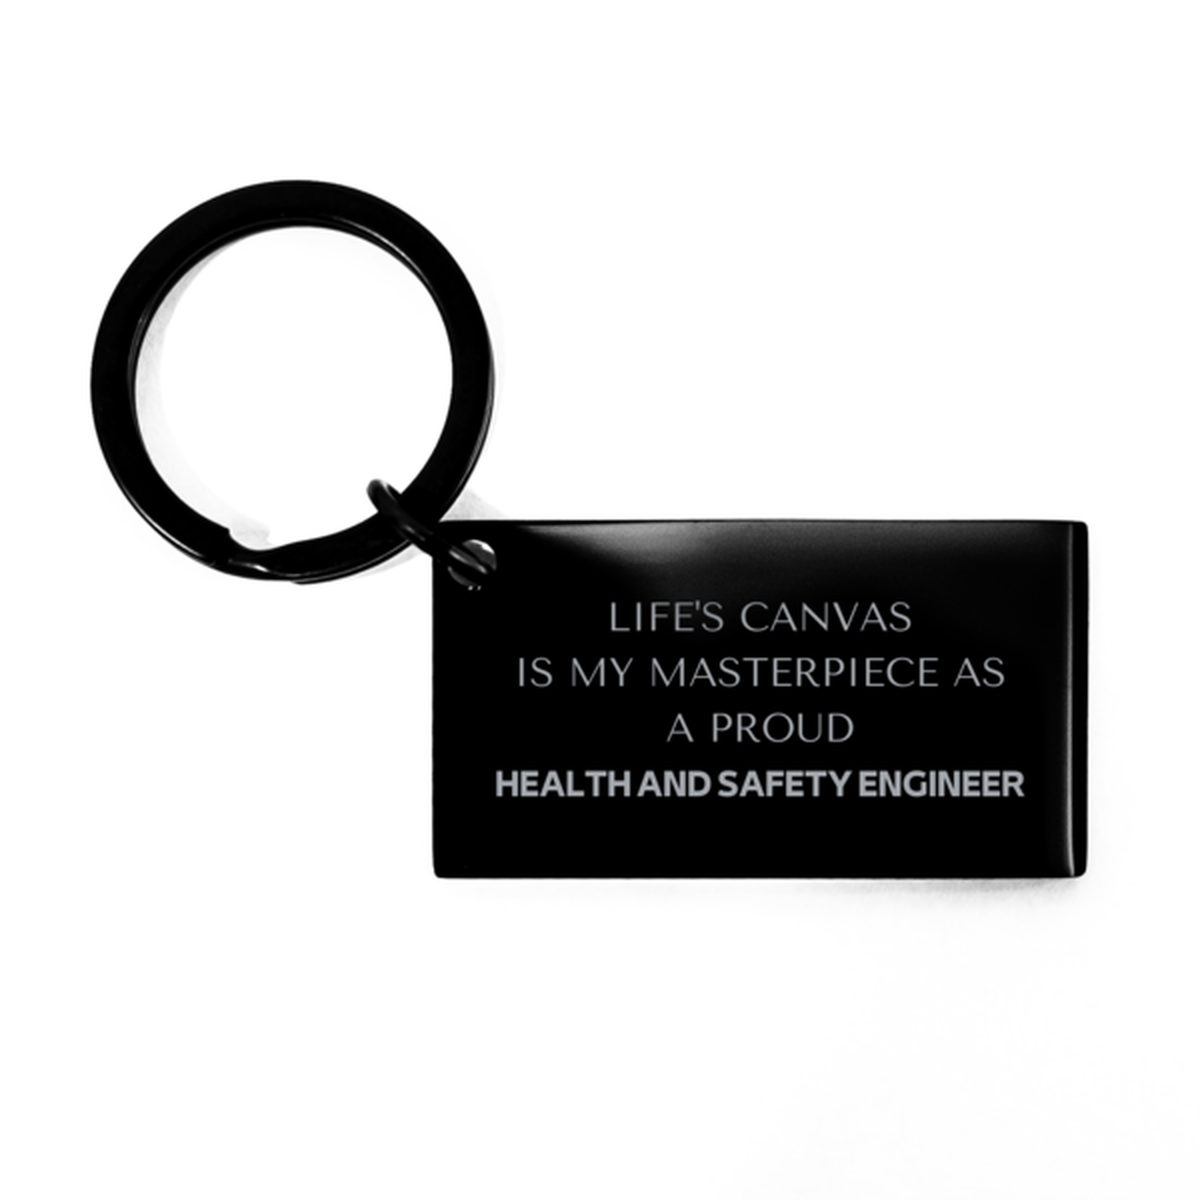 Proud Health and Safety Engineer Gifts, Life's canvas is my masterpiece, Epic Birthday Christmas Unique Keychain For Health and Safety Engineer, Coworkers, Men, Women, Friends